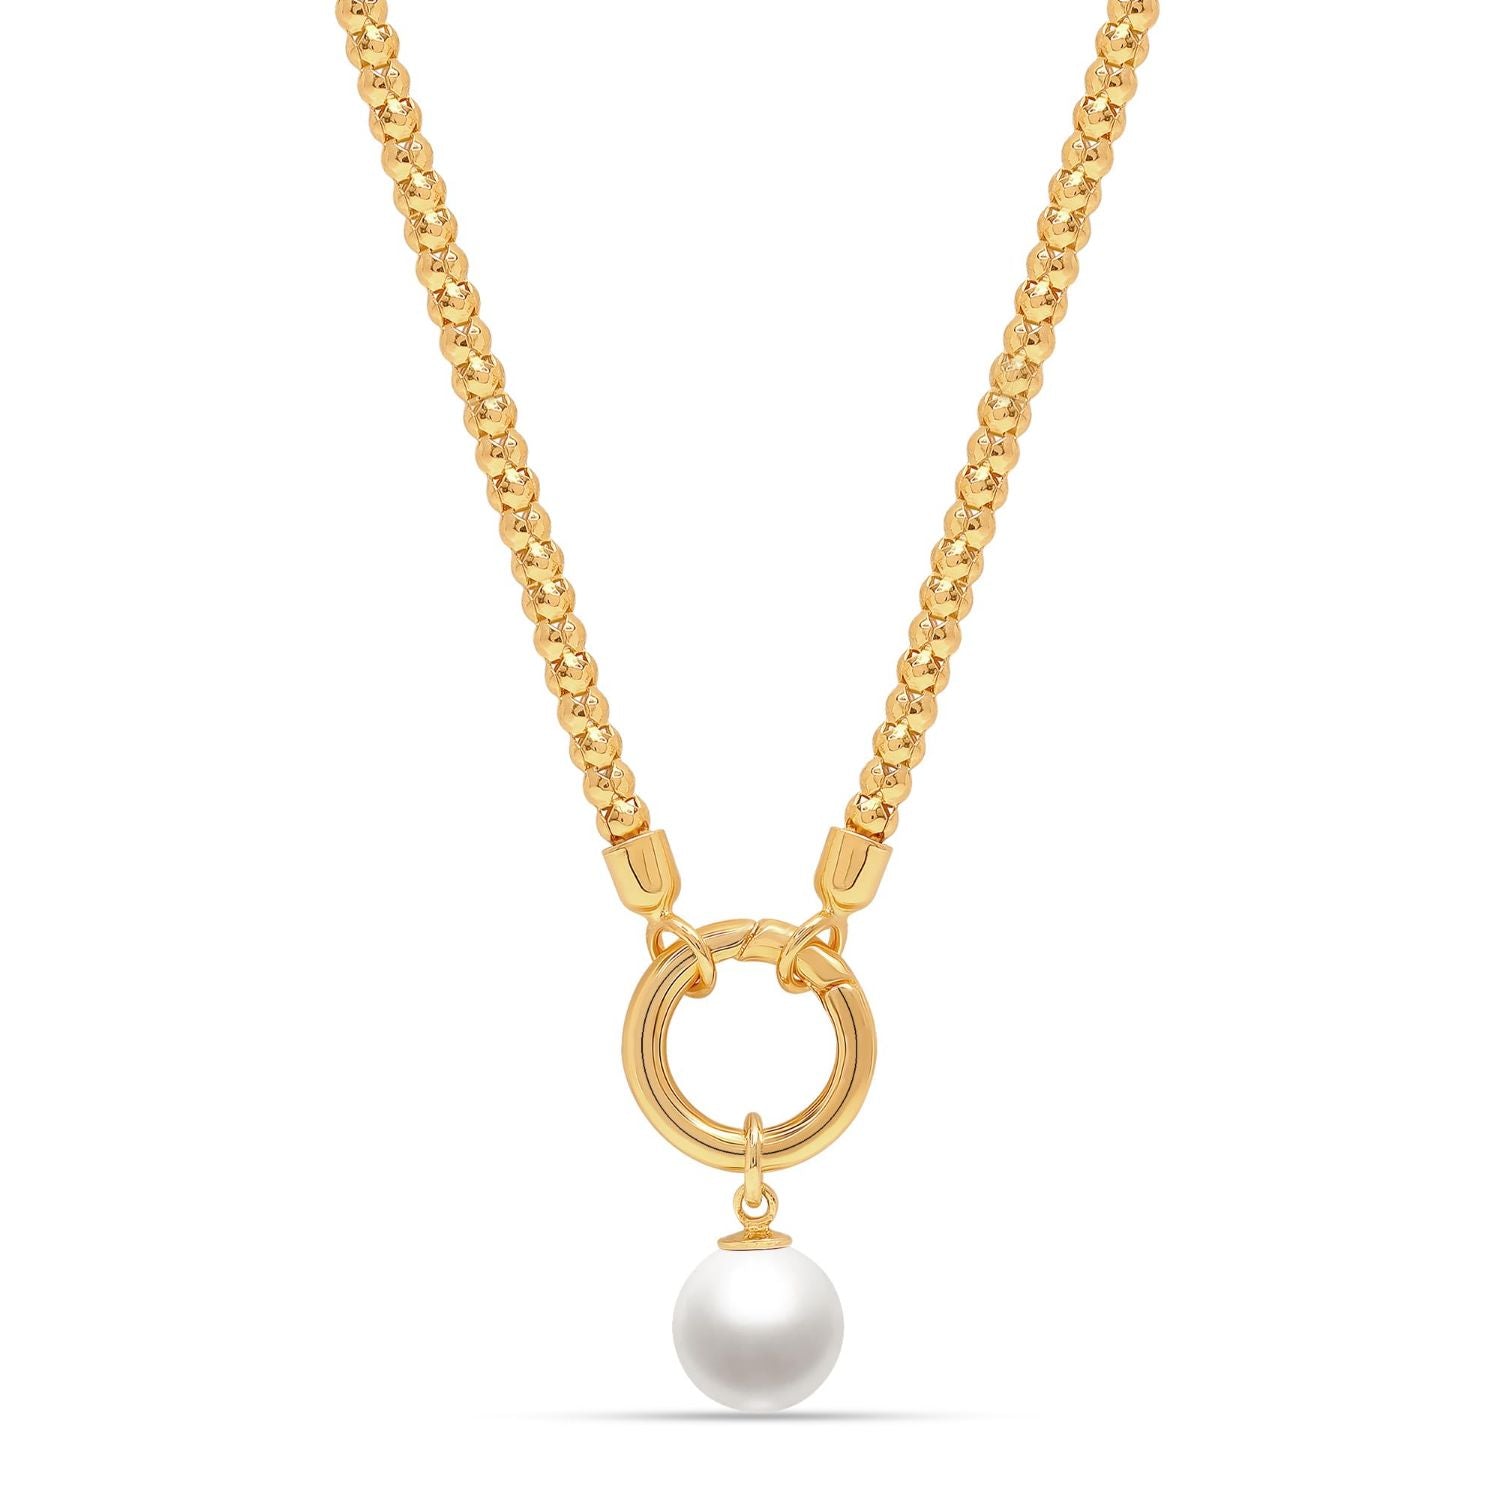 925 Sterling Silver 14K Gold Plated Simulated Pearl Ball Chain Pendant Necklace for Women